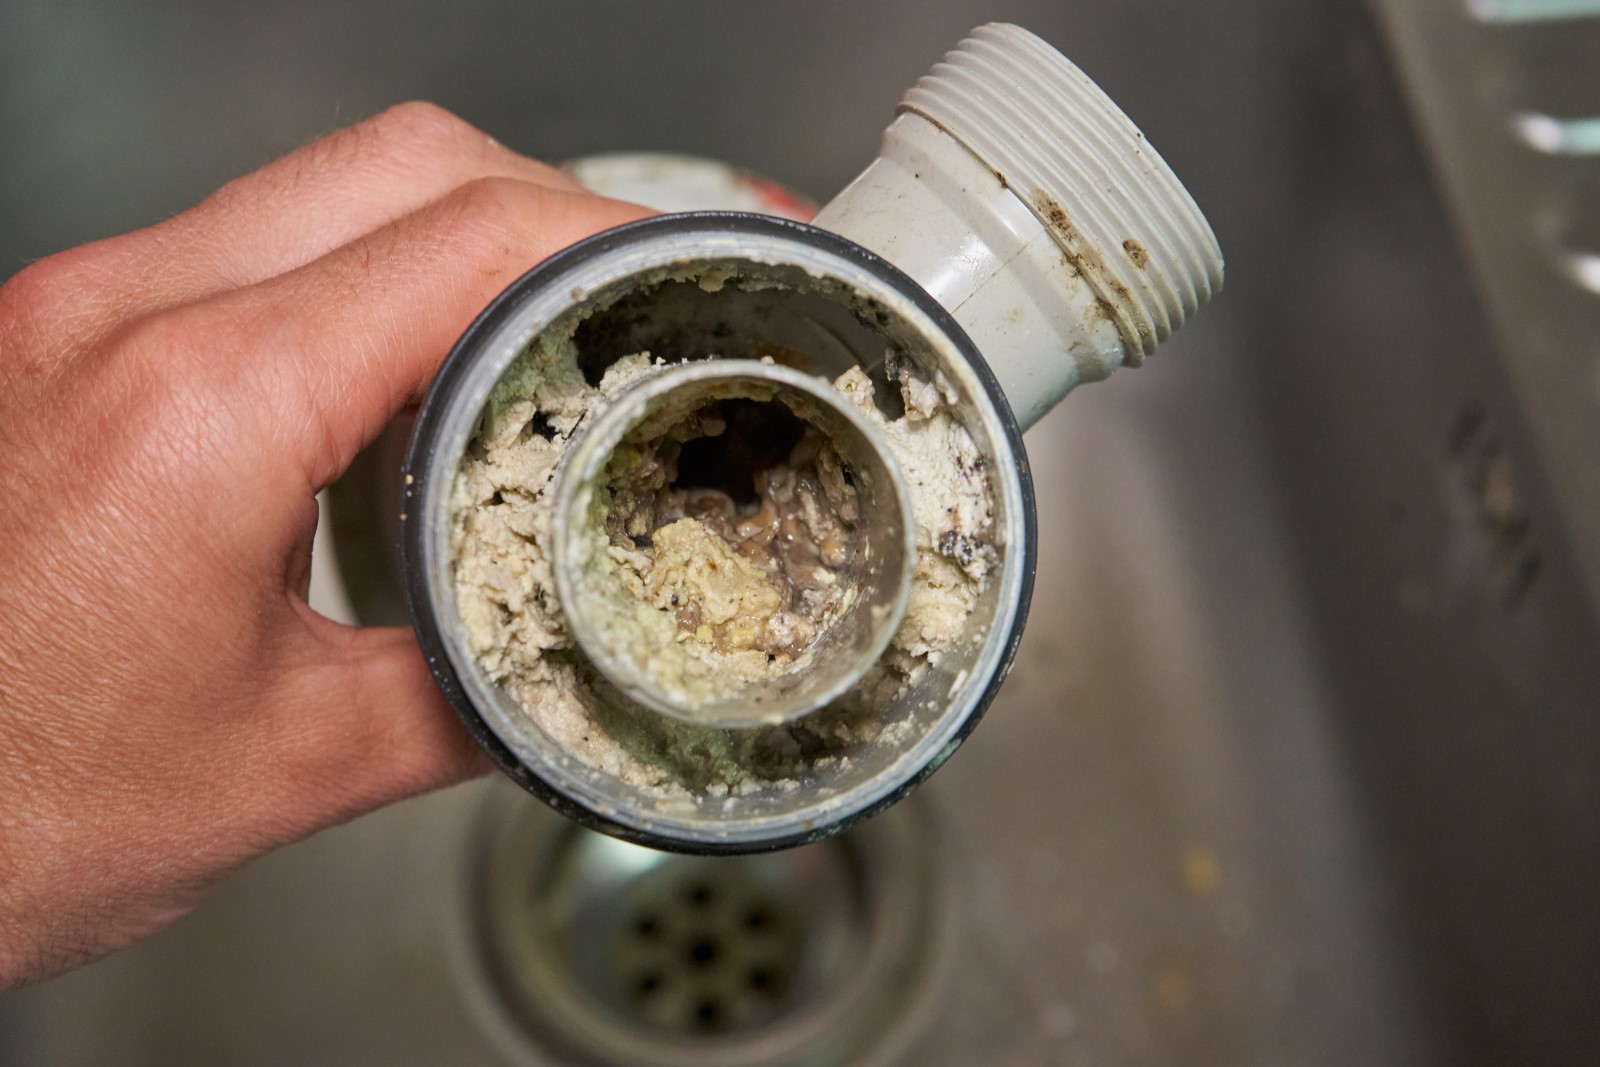 A clogged kitchen sink drain that needs cleaning.